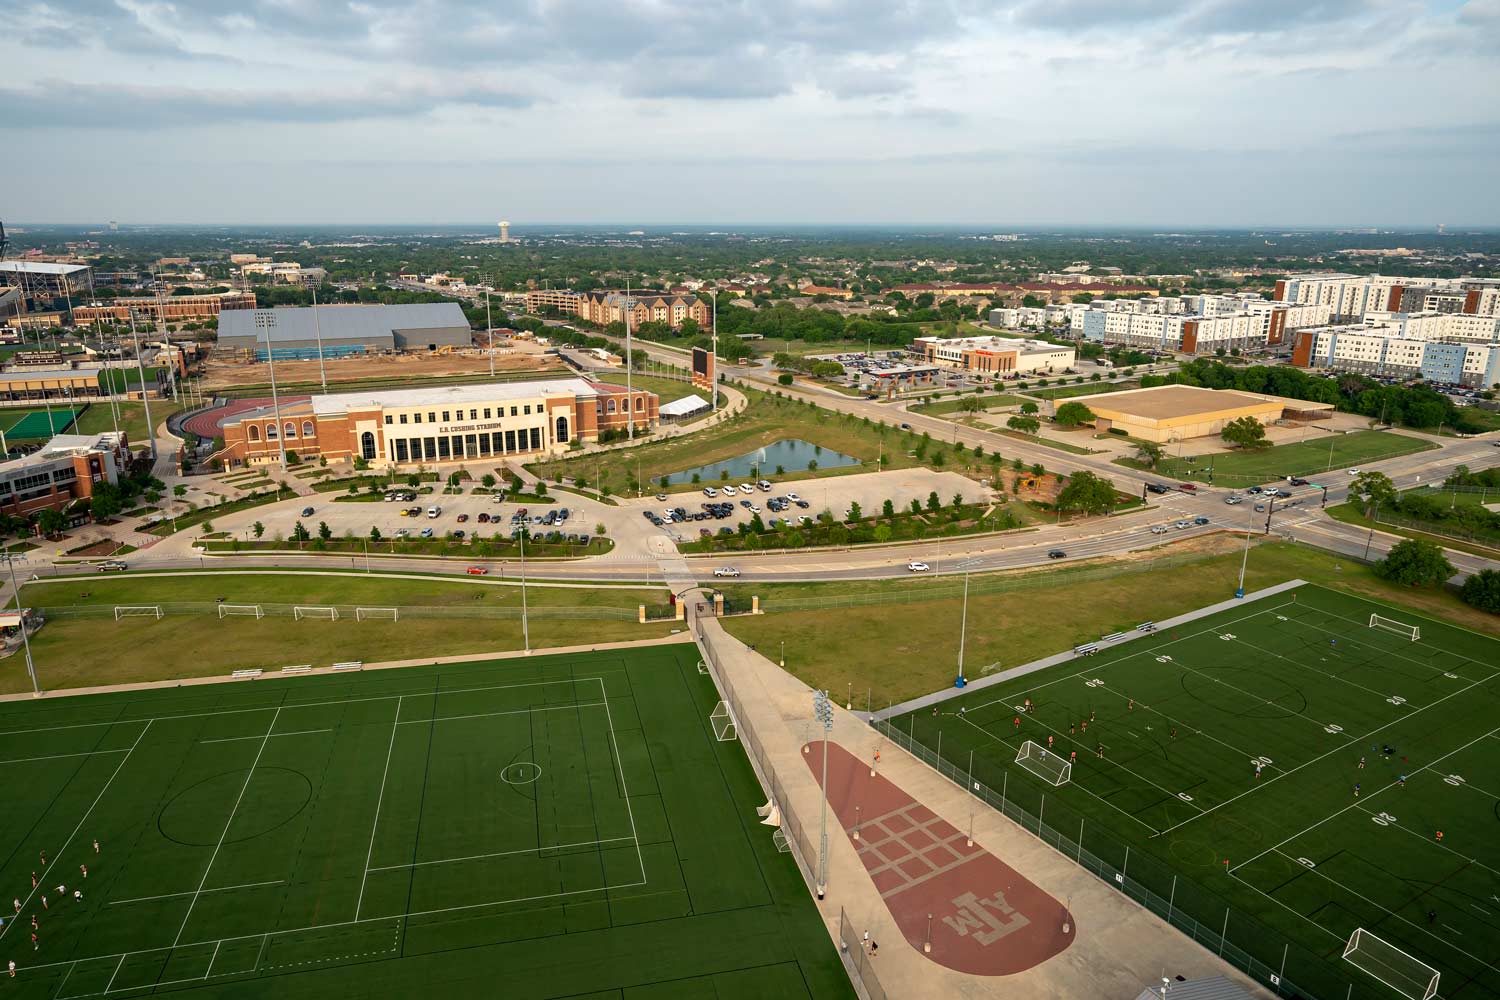 Aerial view of the soccer fields at Penberthy Sports Complex